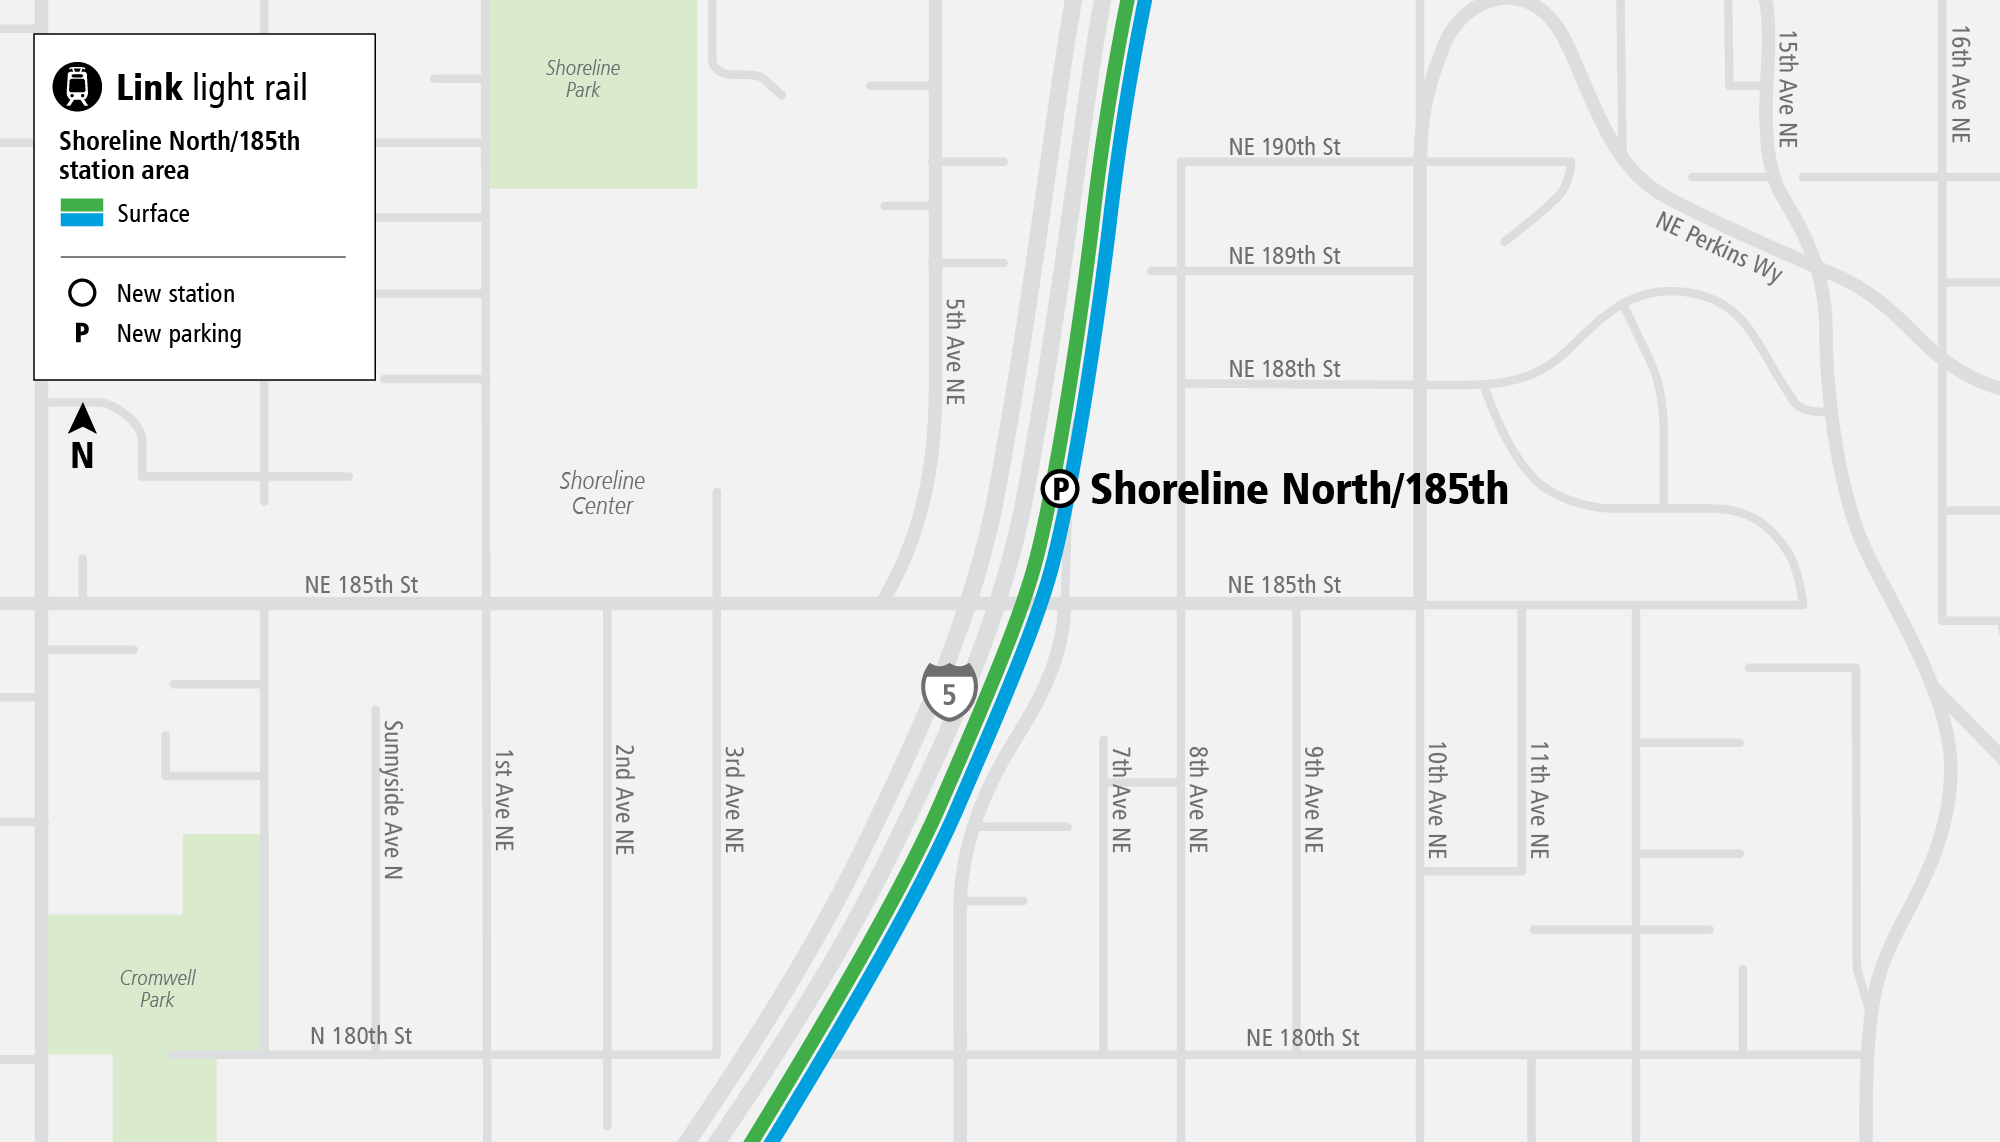 Map of the area surrounding Shoreline North Station